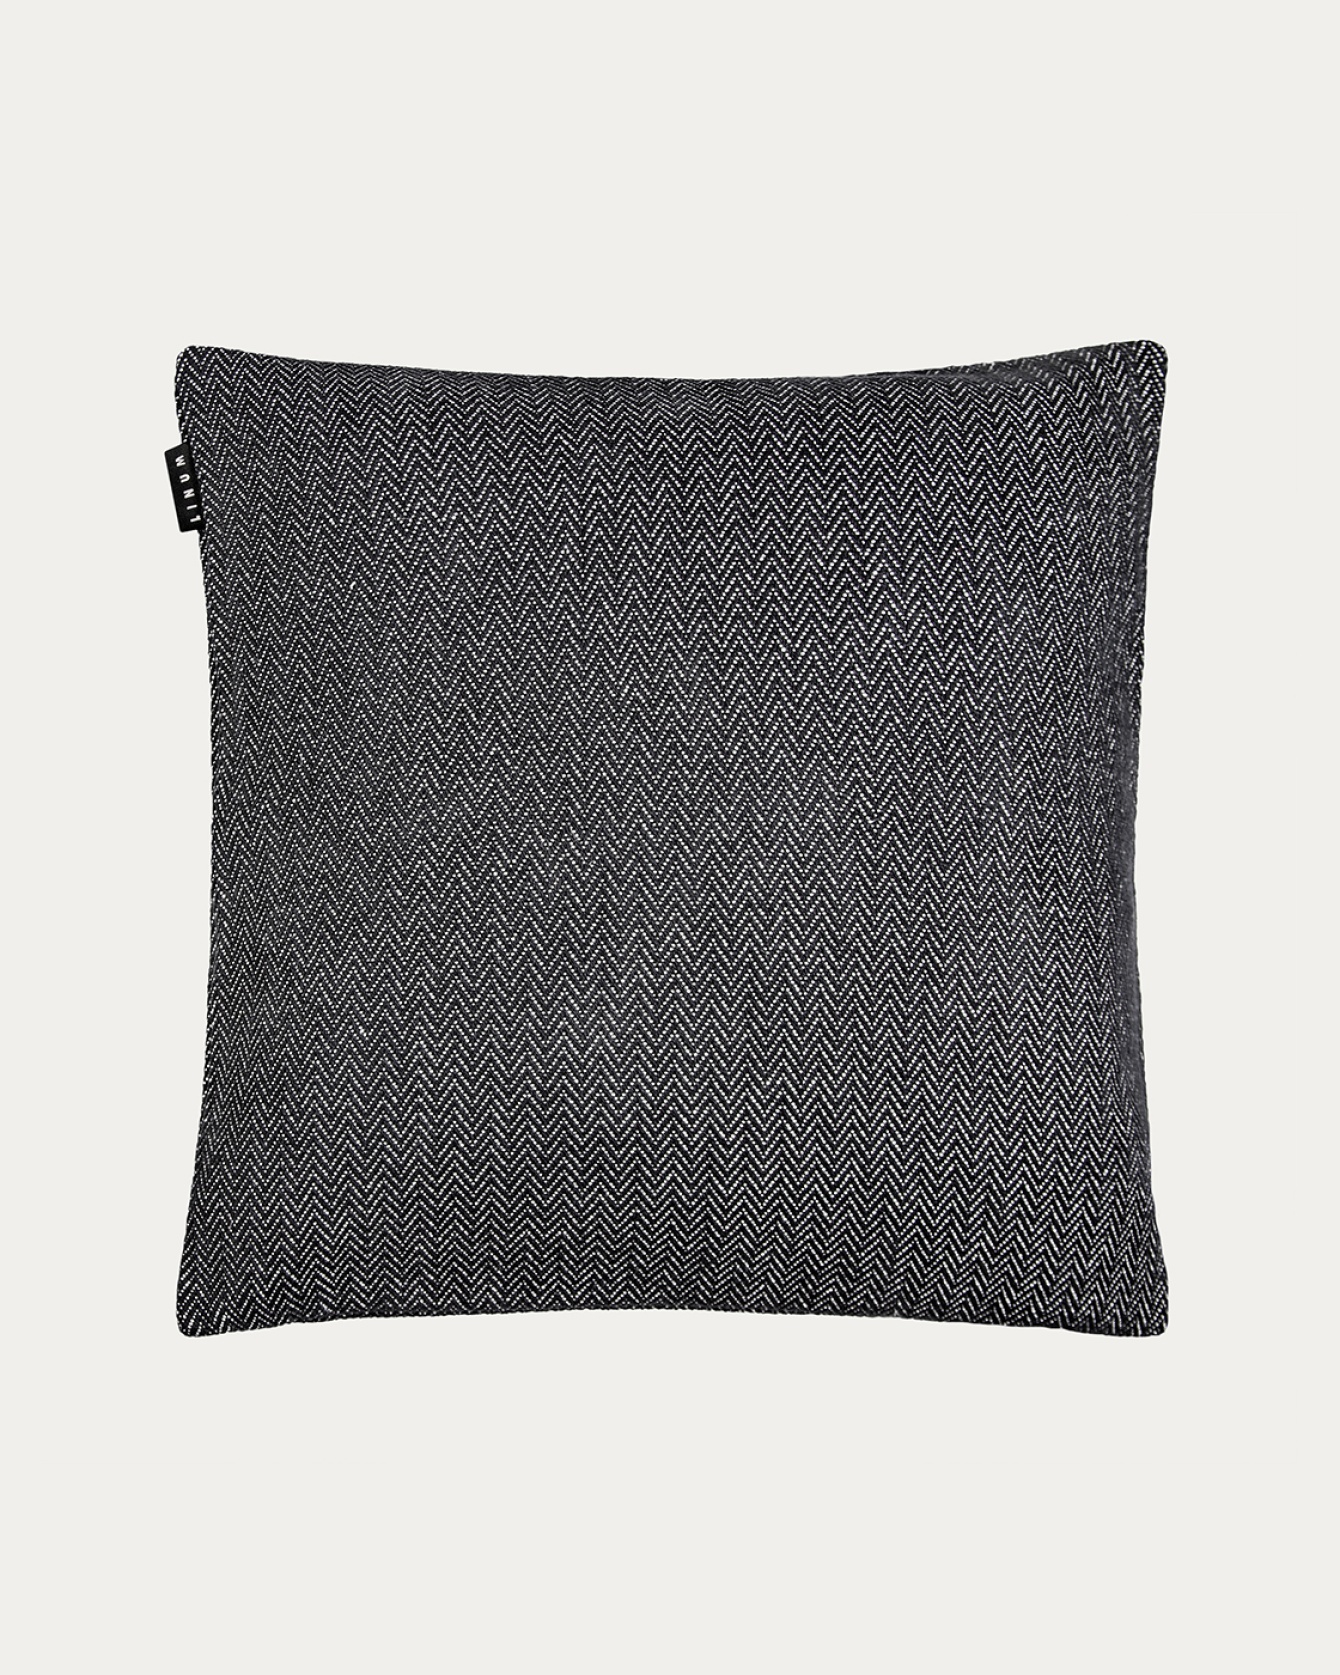 Product image black SHEPARD cushion cover made of soft cotton with a discreet herringbone pattern from LINUM DESIGN. Size 50x50 cm.